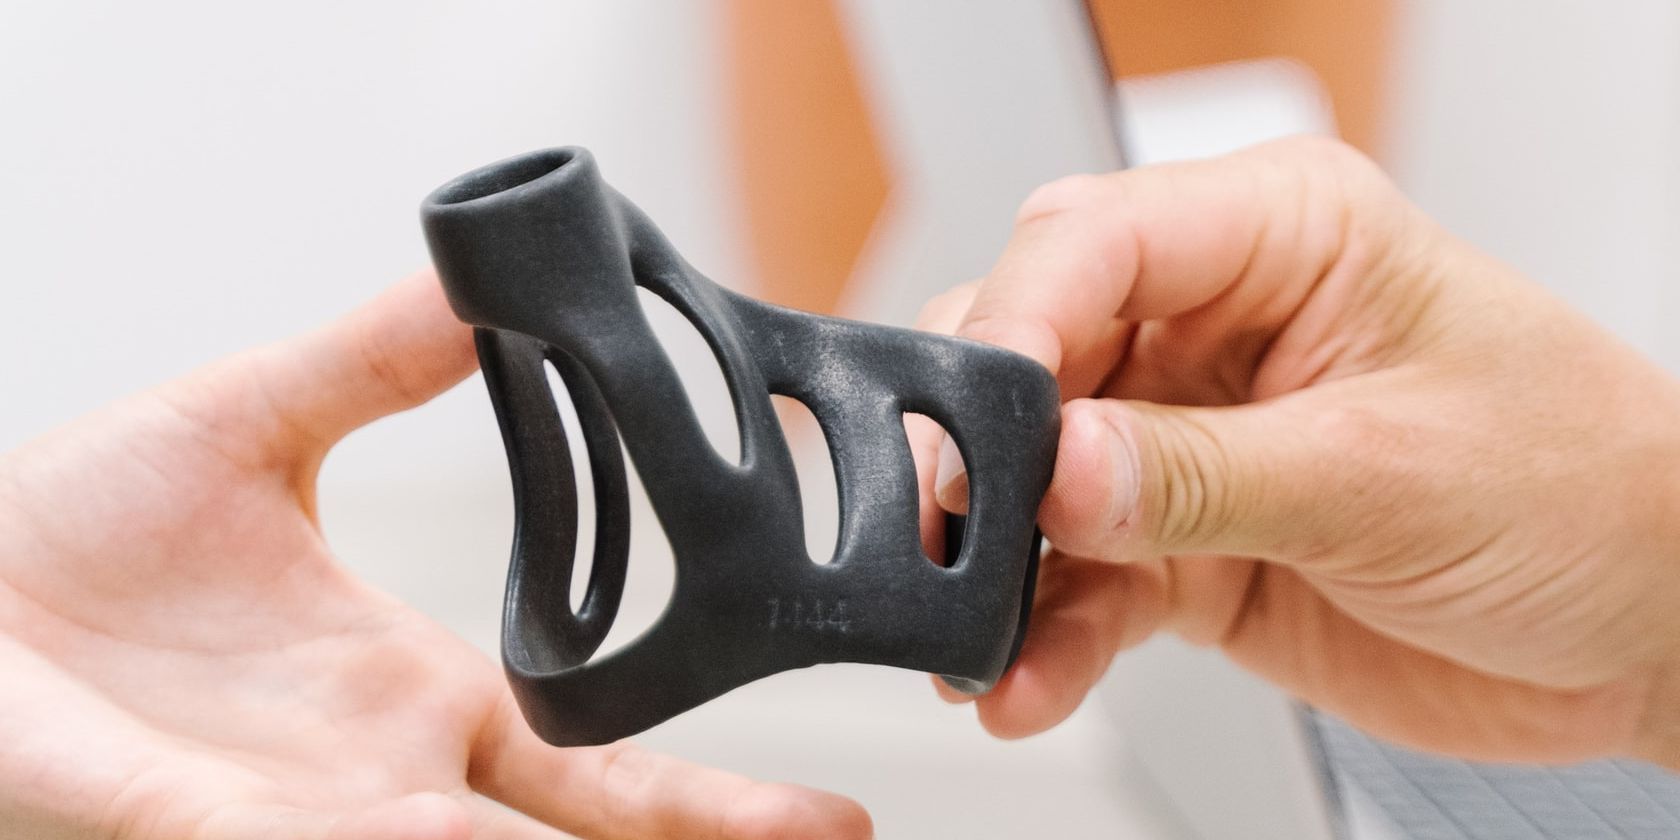 Using a 3D Printer to Create Disposable First Aid Tools